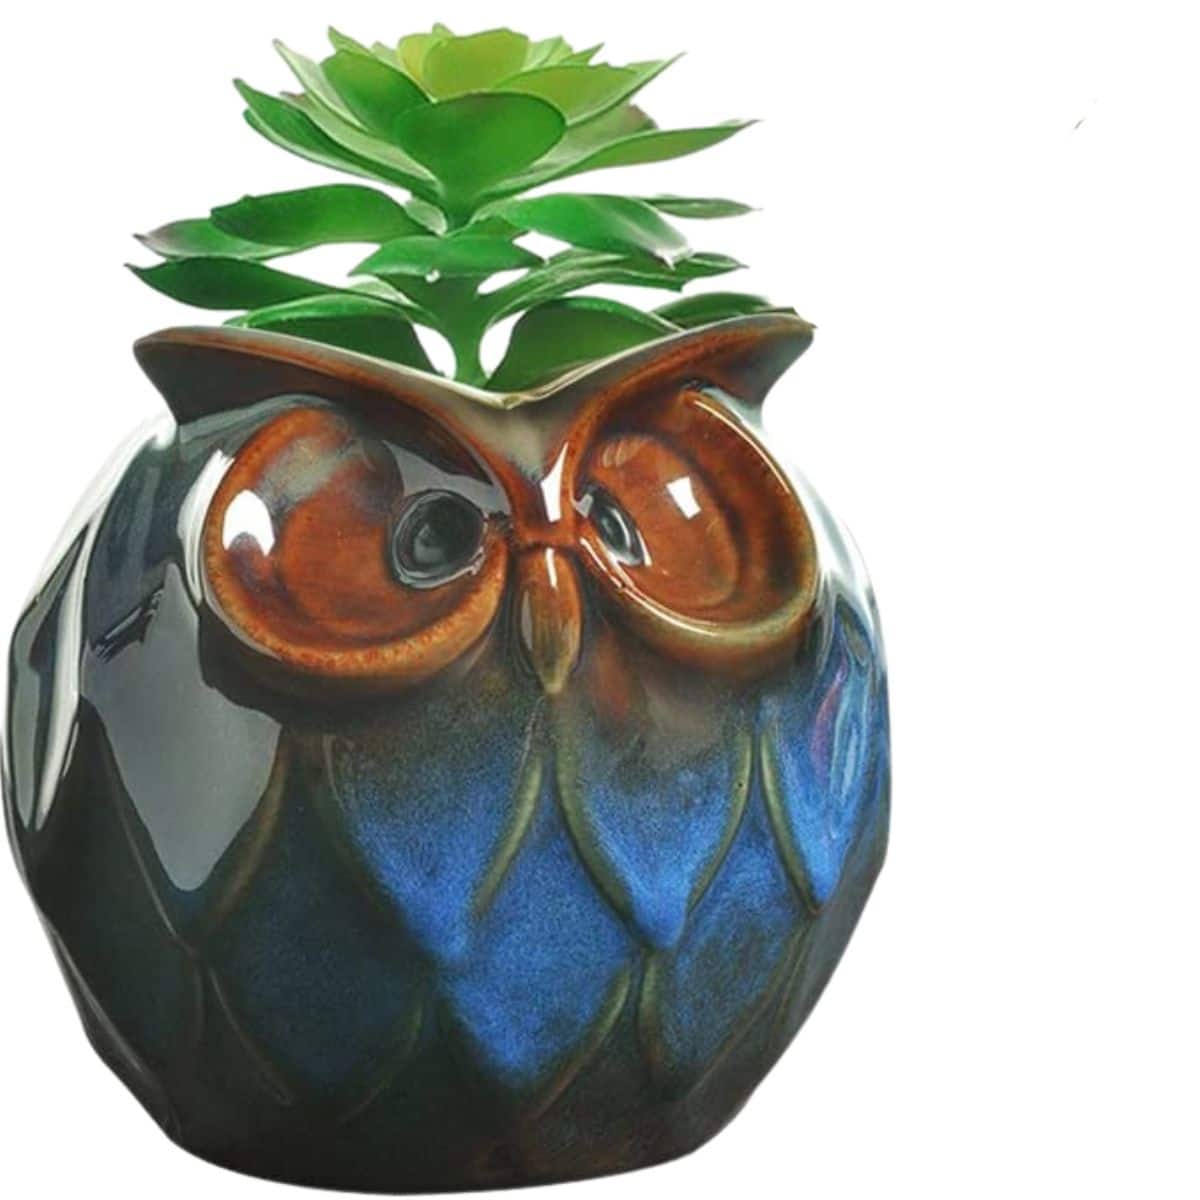 owl plant container with succulent planted inside from amazon